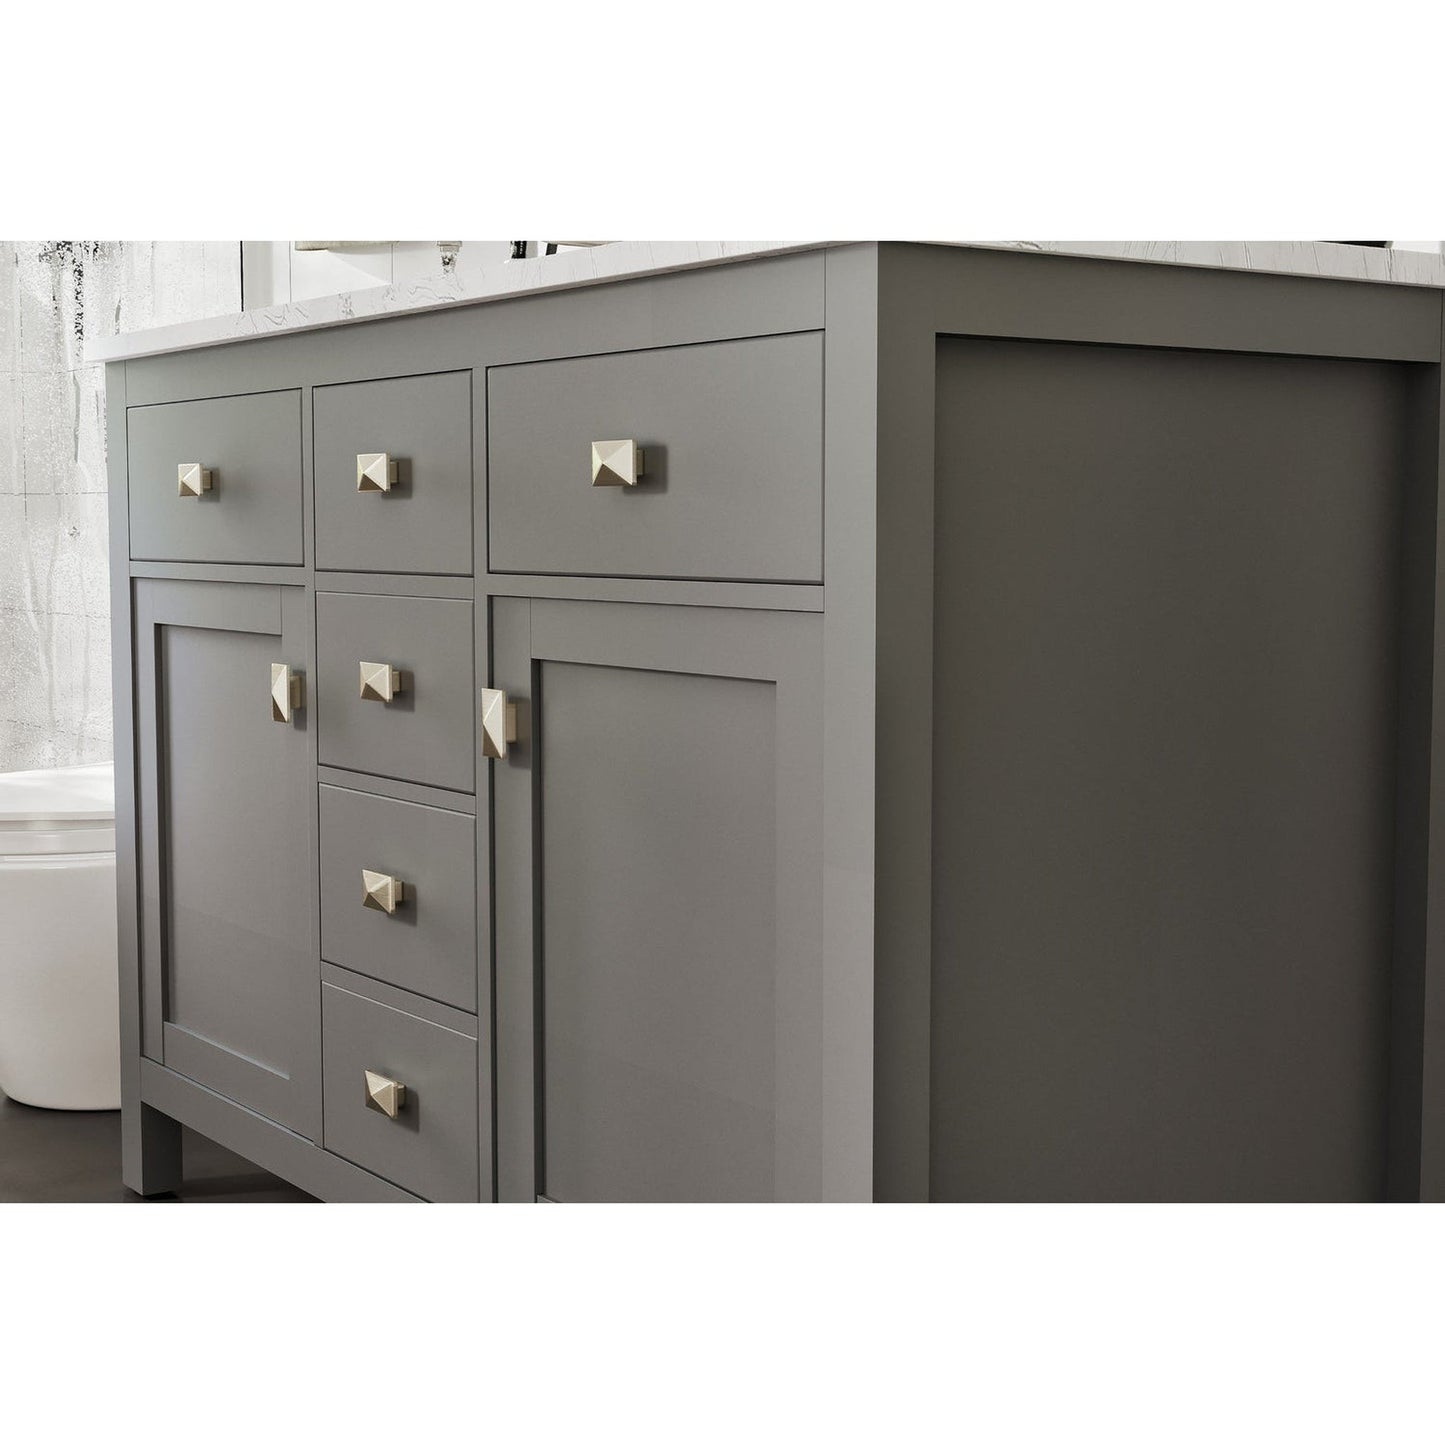 Eviva Totti Artemis 44" x 34" Gray Freestanding Bathroom Vanity With Carrara Style Man-made Stone Countertop and Double Undermount Sink